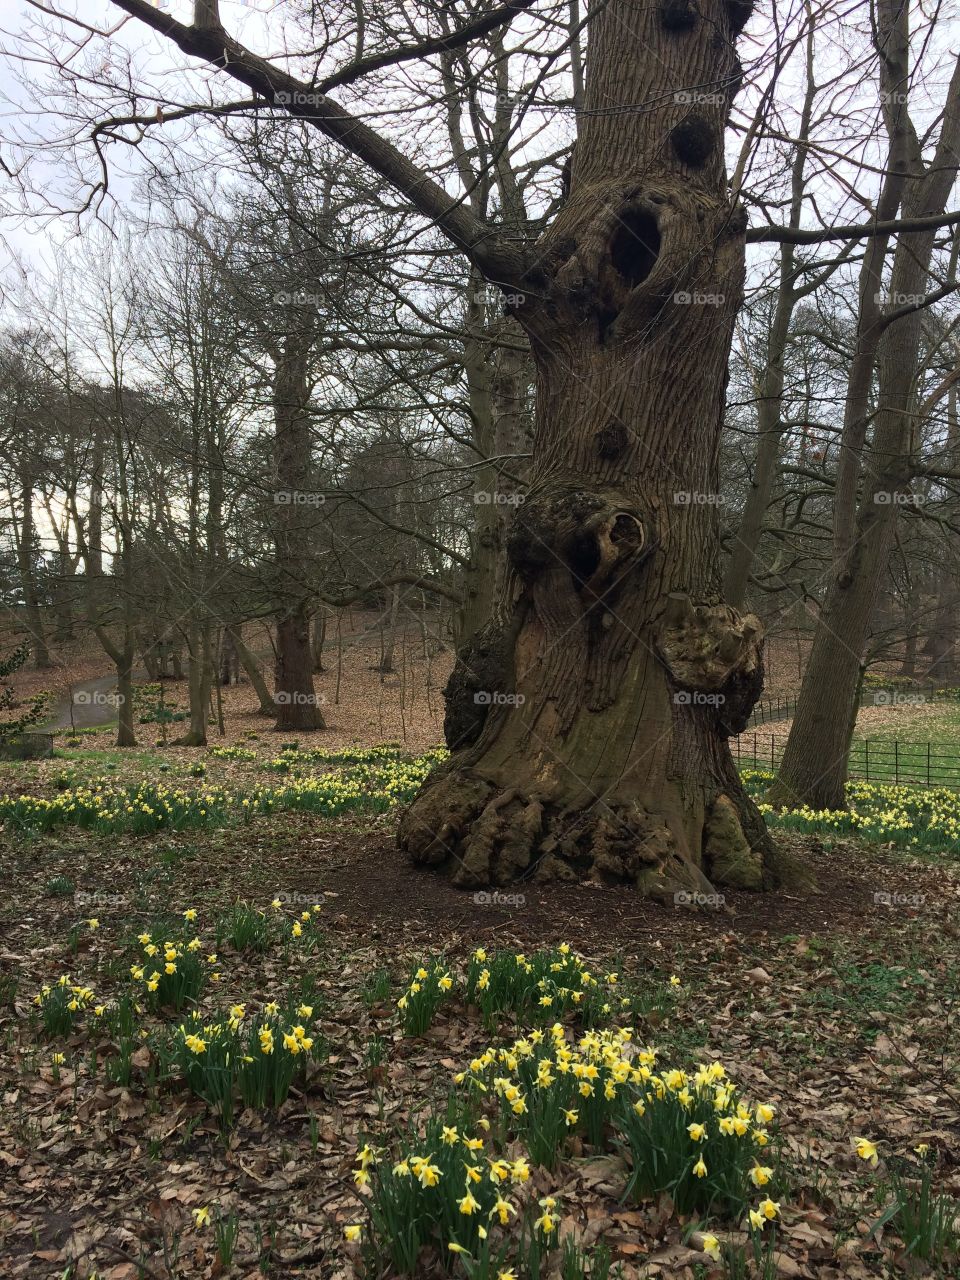 Daffodils in the woods at Painshill, Cobham, Surrey, England.